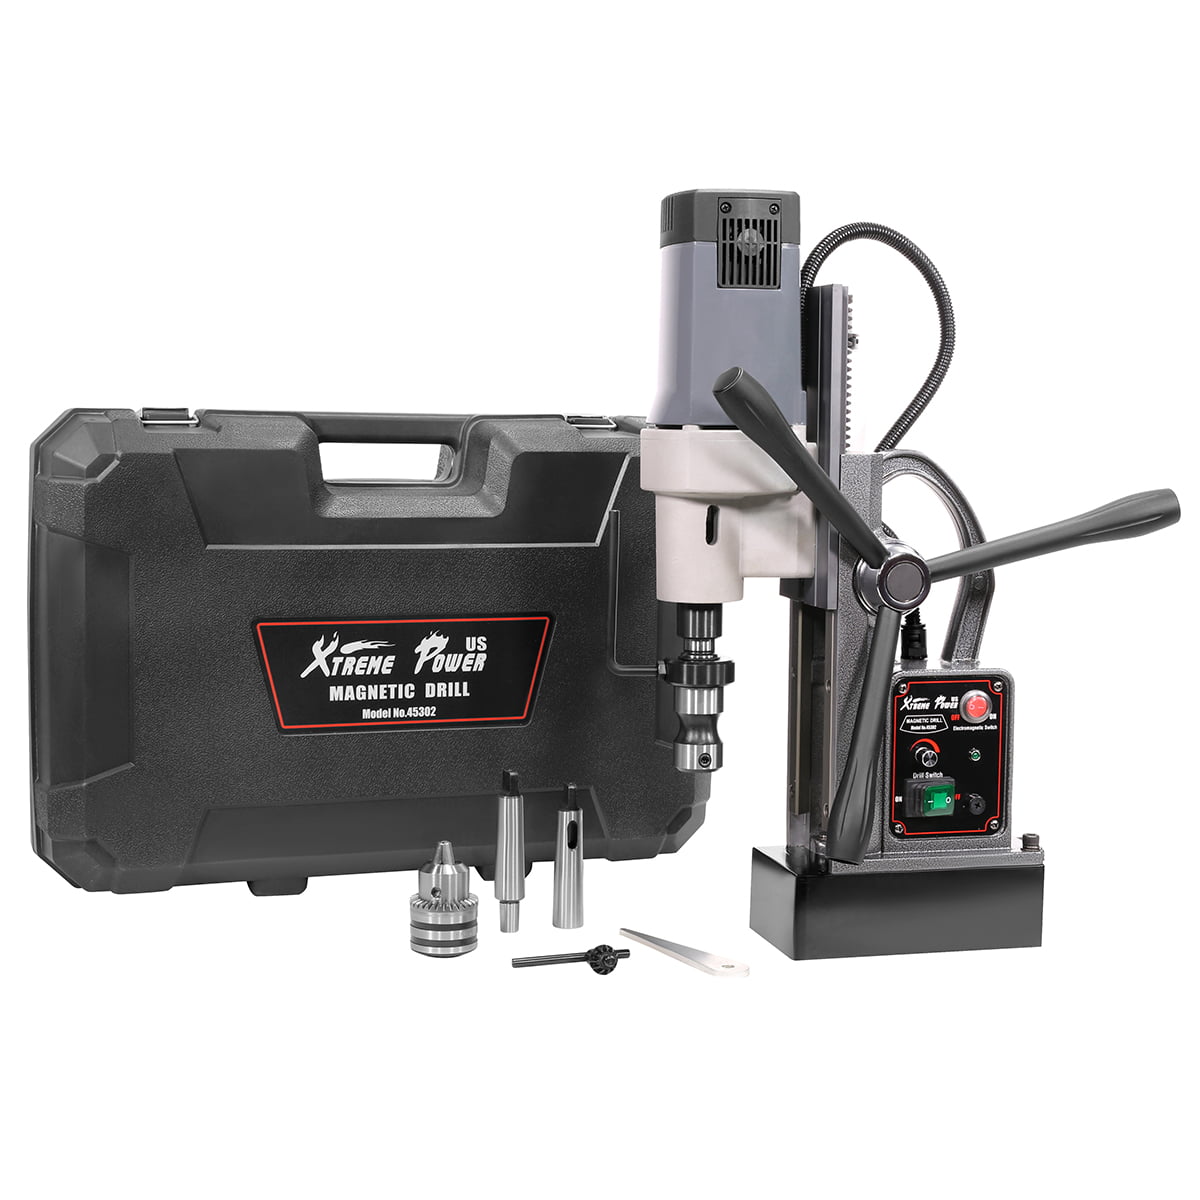 Magnetic Drill Base Press Boring 1200W Magnet Force 9000N w/Coolant & Carry Case 